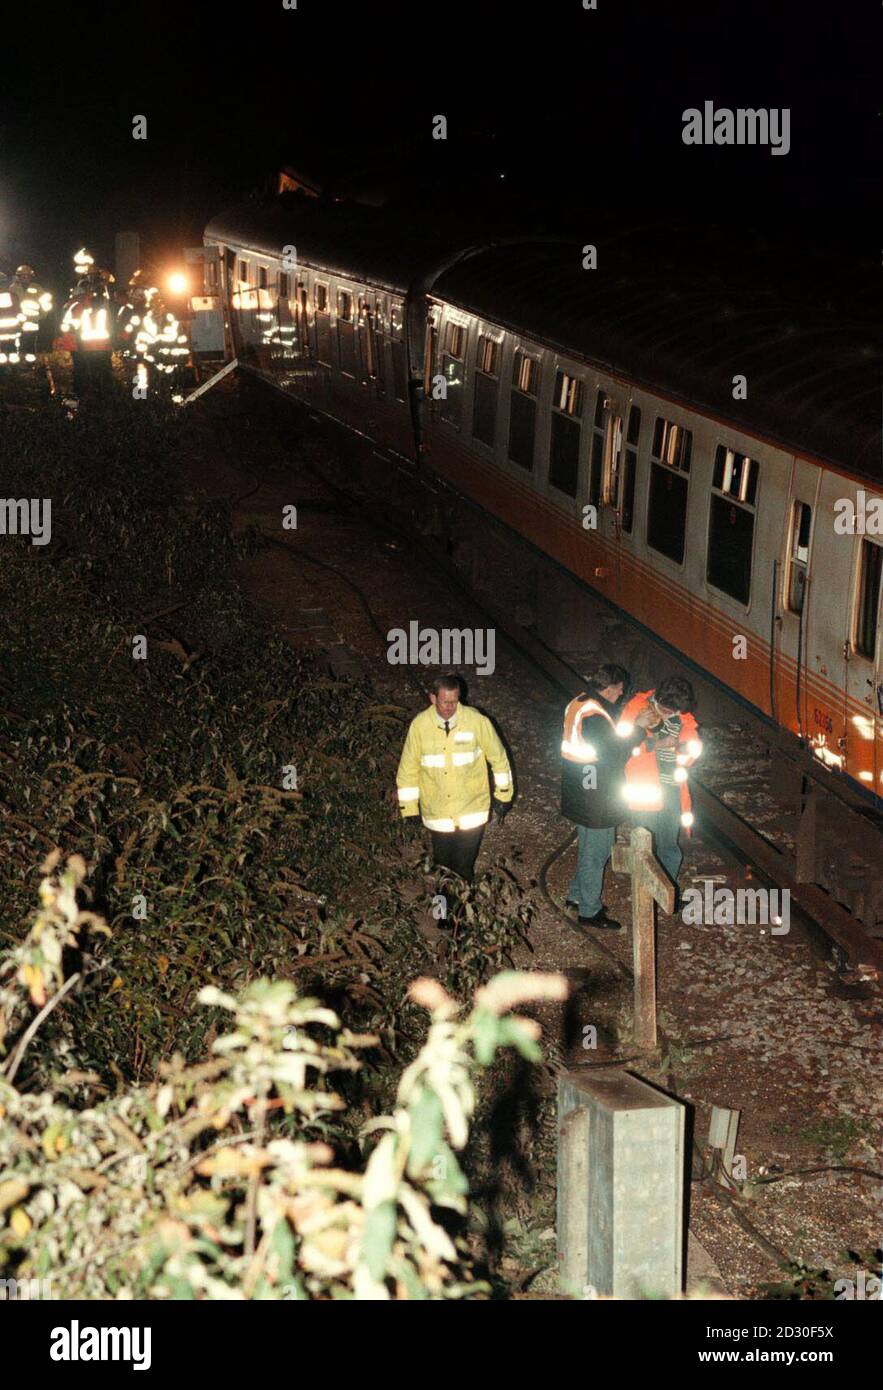 Railway engineers attend the scene outside Lewes Station, in east Sussex, after a busy commuter train hit a slow-moving train at a junction. No one was injured in the collision which came just 13 days after the Paddington rail disaster. Stock Photo